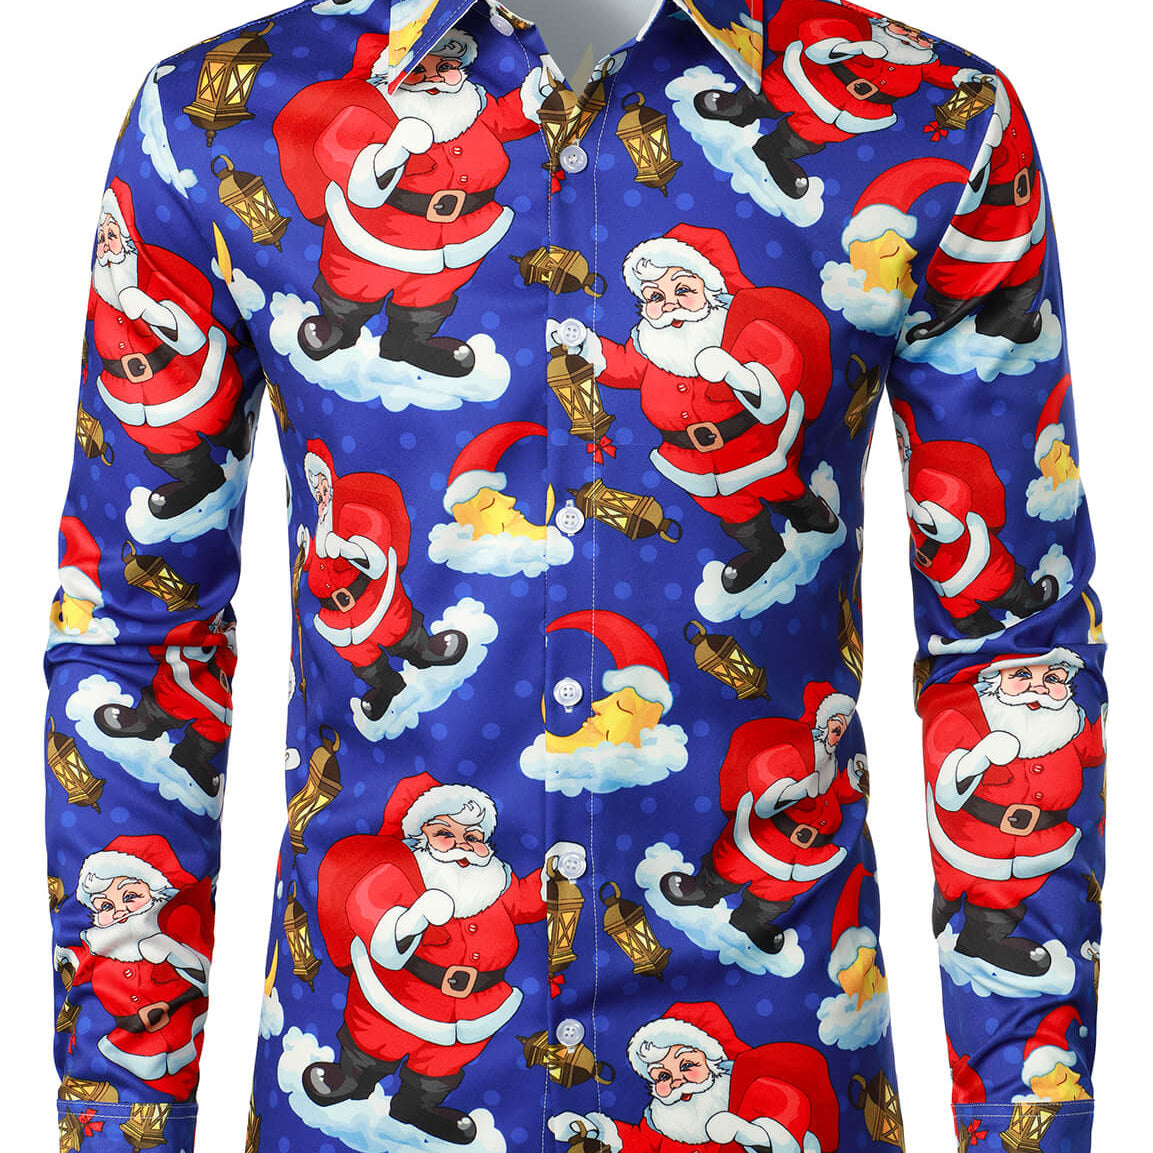 Men's Santa Claus Christmas Button Party Funny Holiday Blue Long Sleeve Shirt